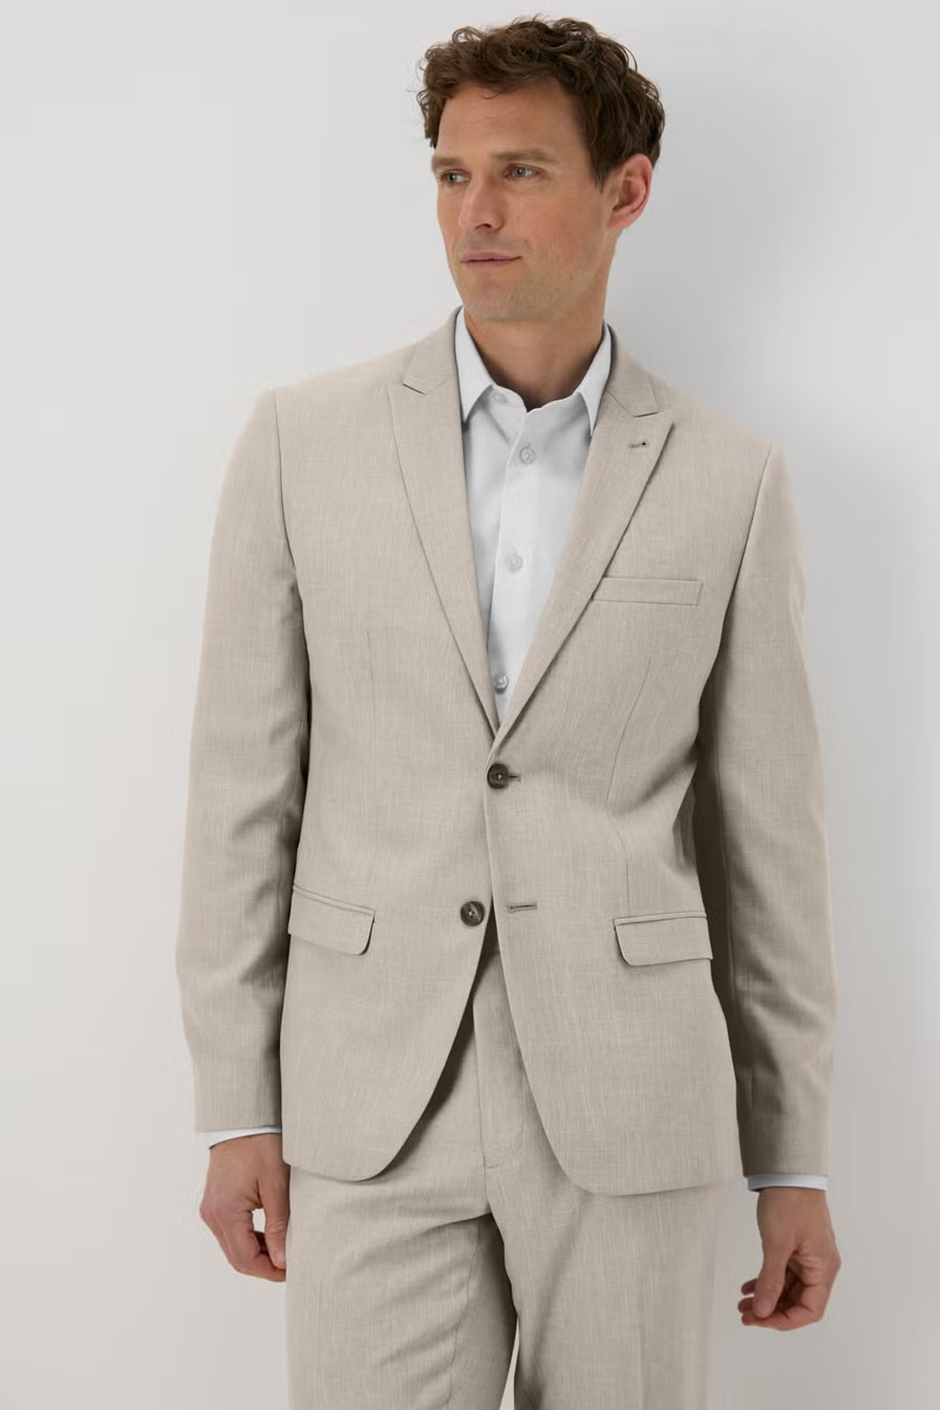 Beige groomsmen suit from Matalan in stone natural tone, slim fit design for weddings